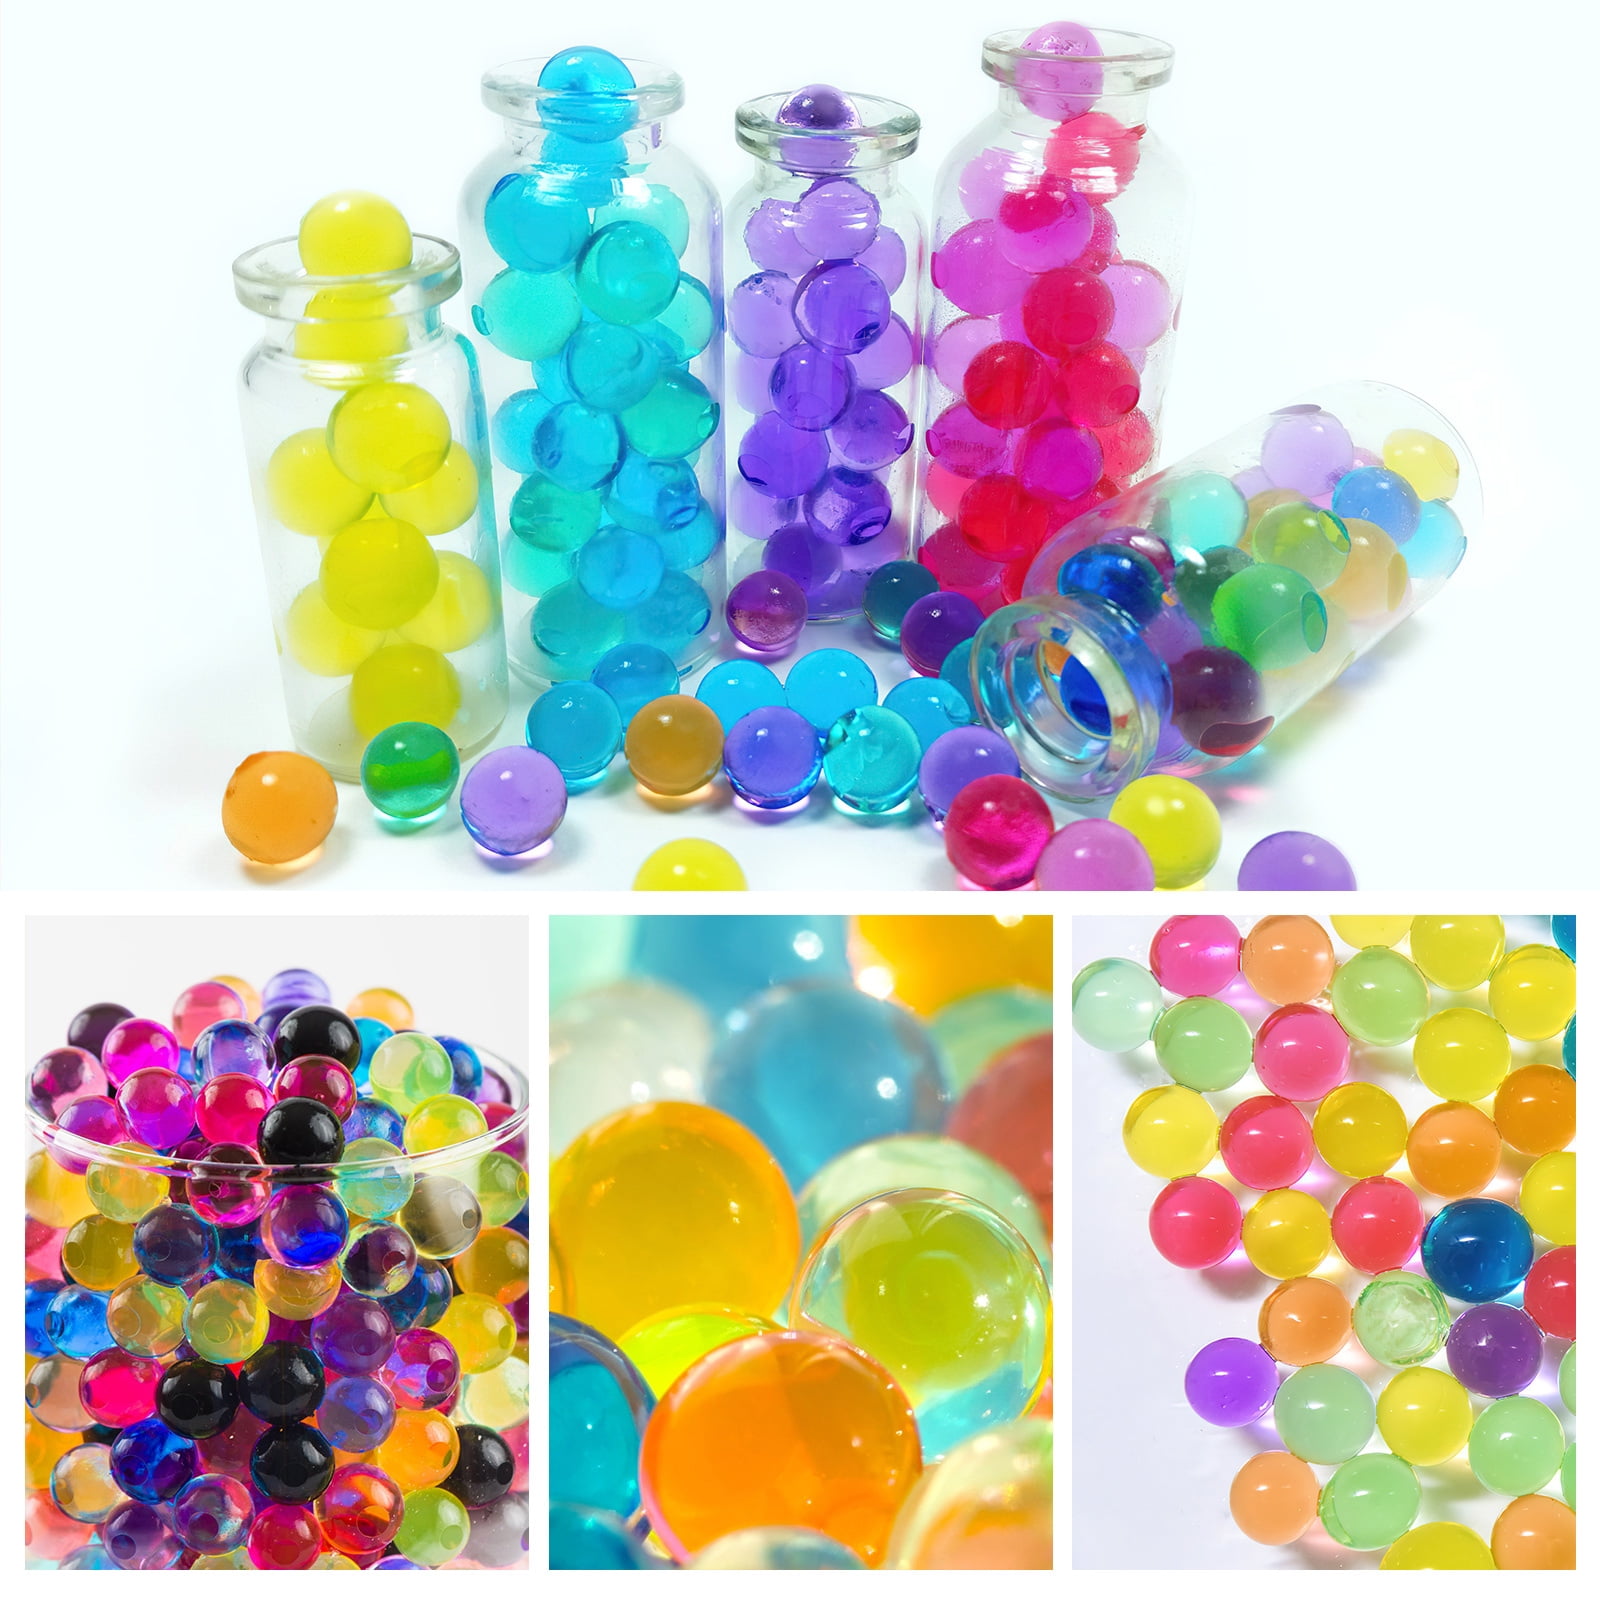 NIKOEO Clear Water Beads, 10000 Pcs Clear Water Gel Jelly Beads Vase Filler  for Floating Candle Making, Wedding Centerpiece, Festive Floral Decoration